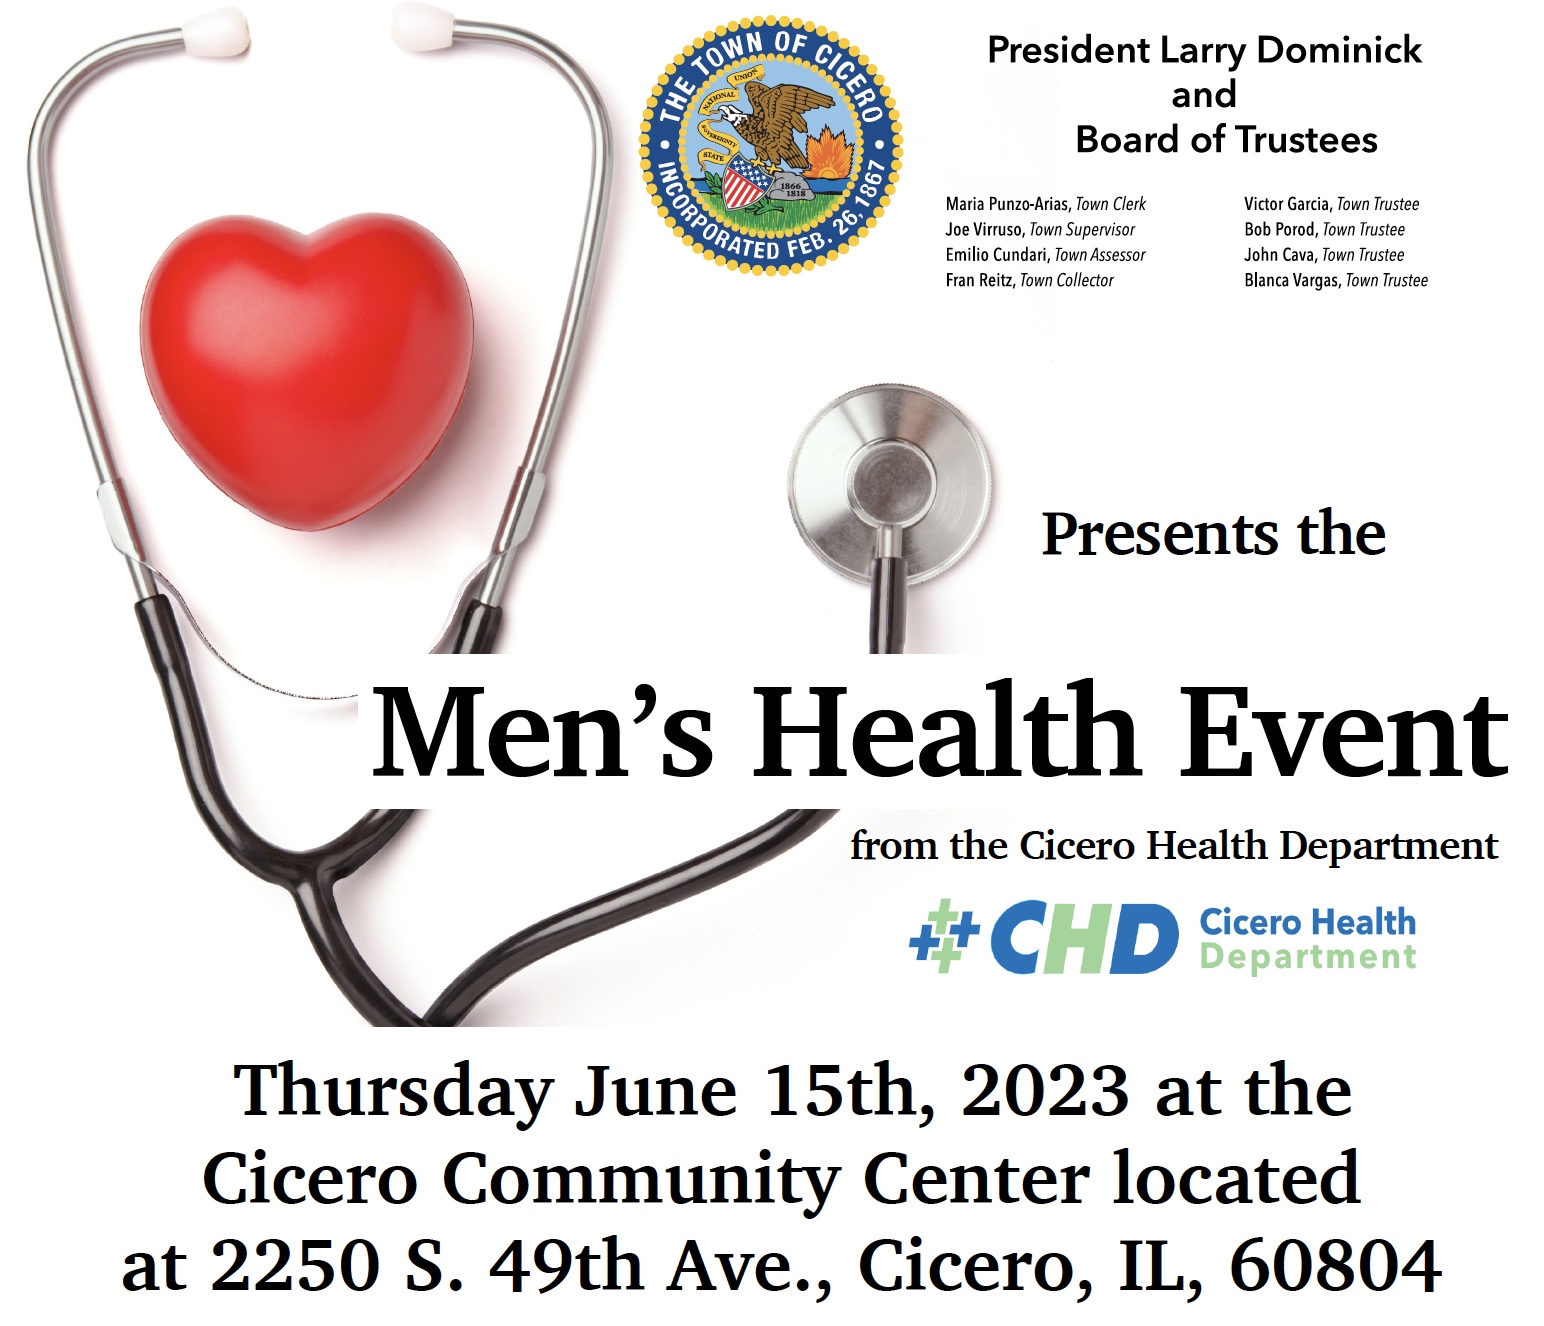 Town President Larry Dominick, the Town of Cicero Board of Trustees and the Health Department are excited to announce they will be hosting the very first Men’s Health event on June 15th, 2023 for the Town of Cicero.